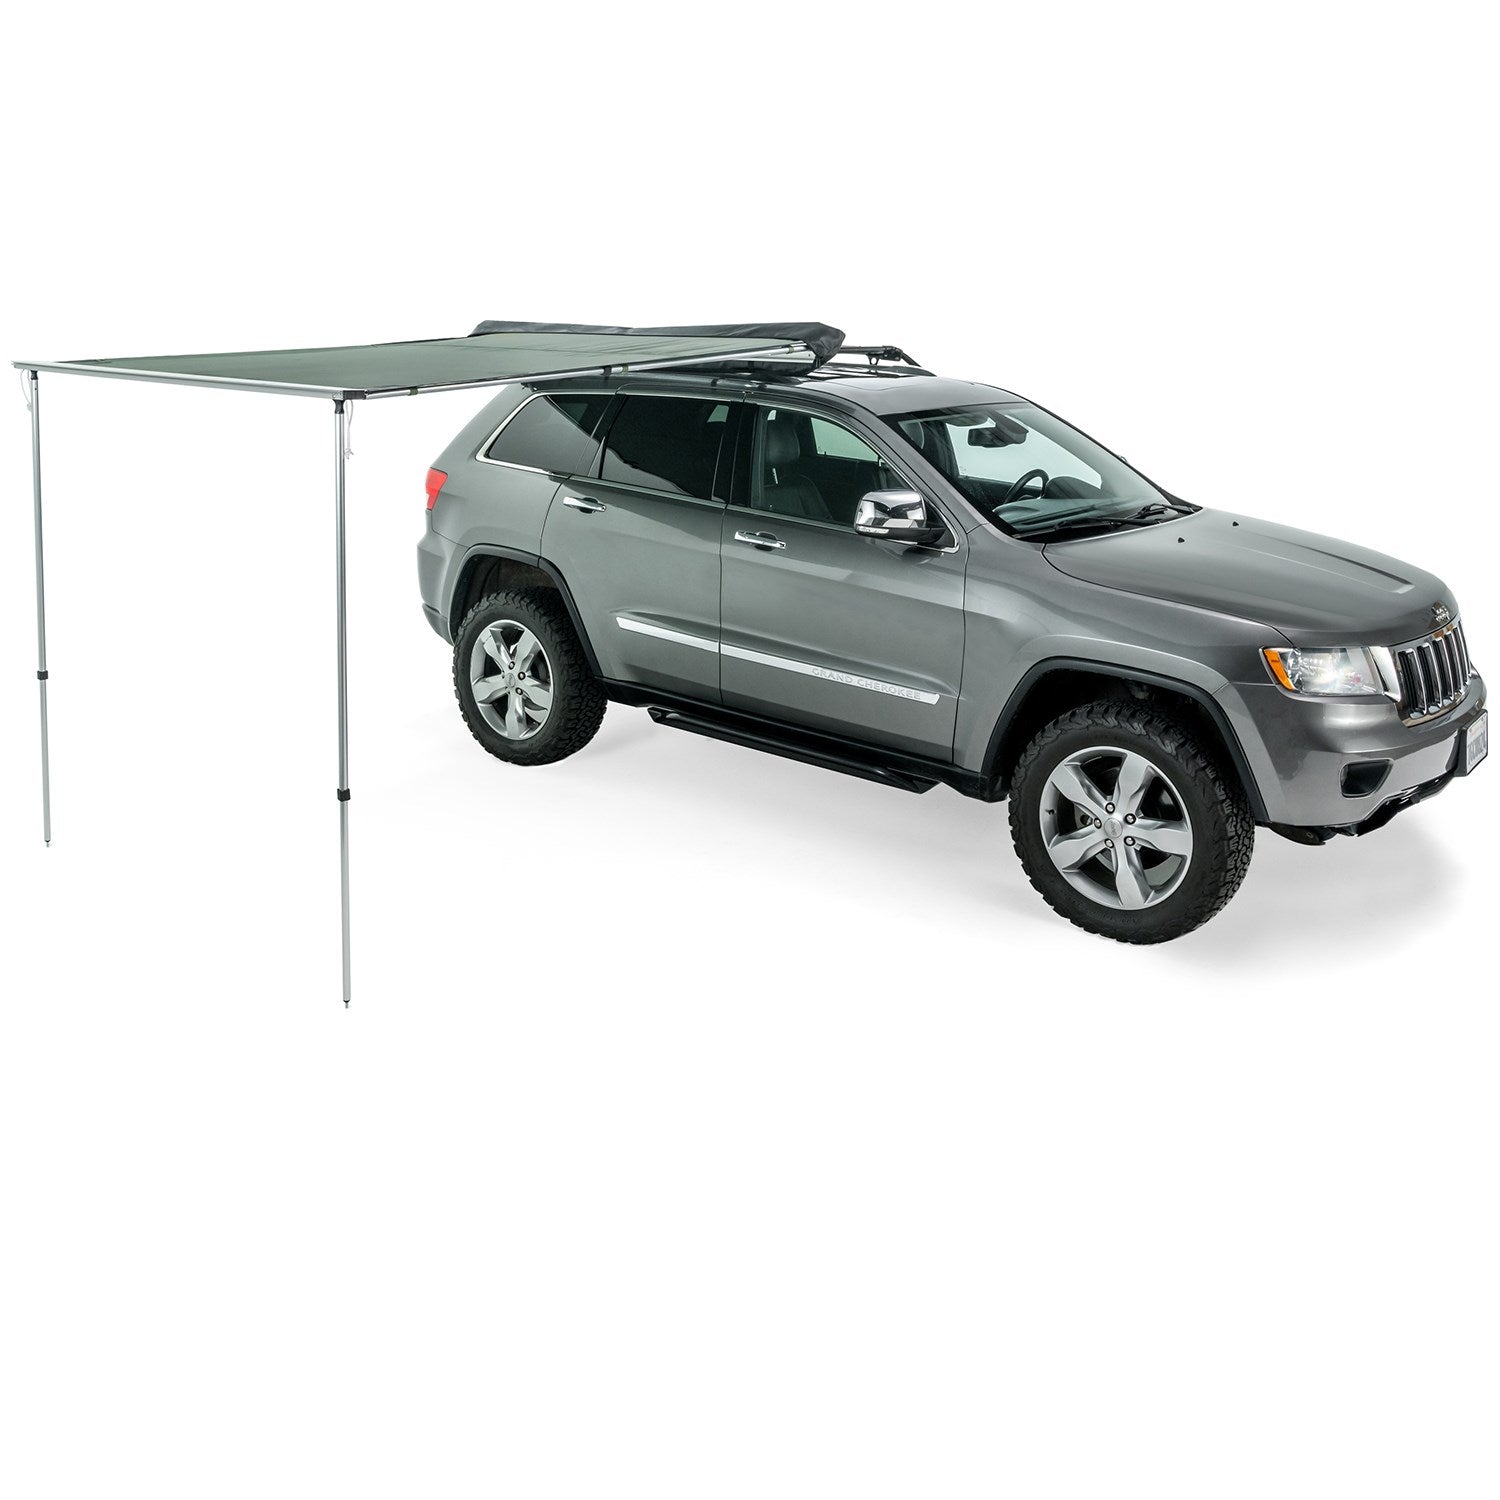 Thule Thule OverCast Awning- 6.5'